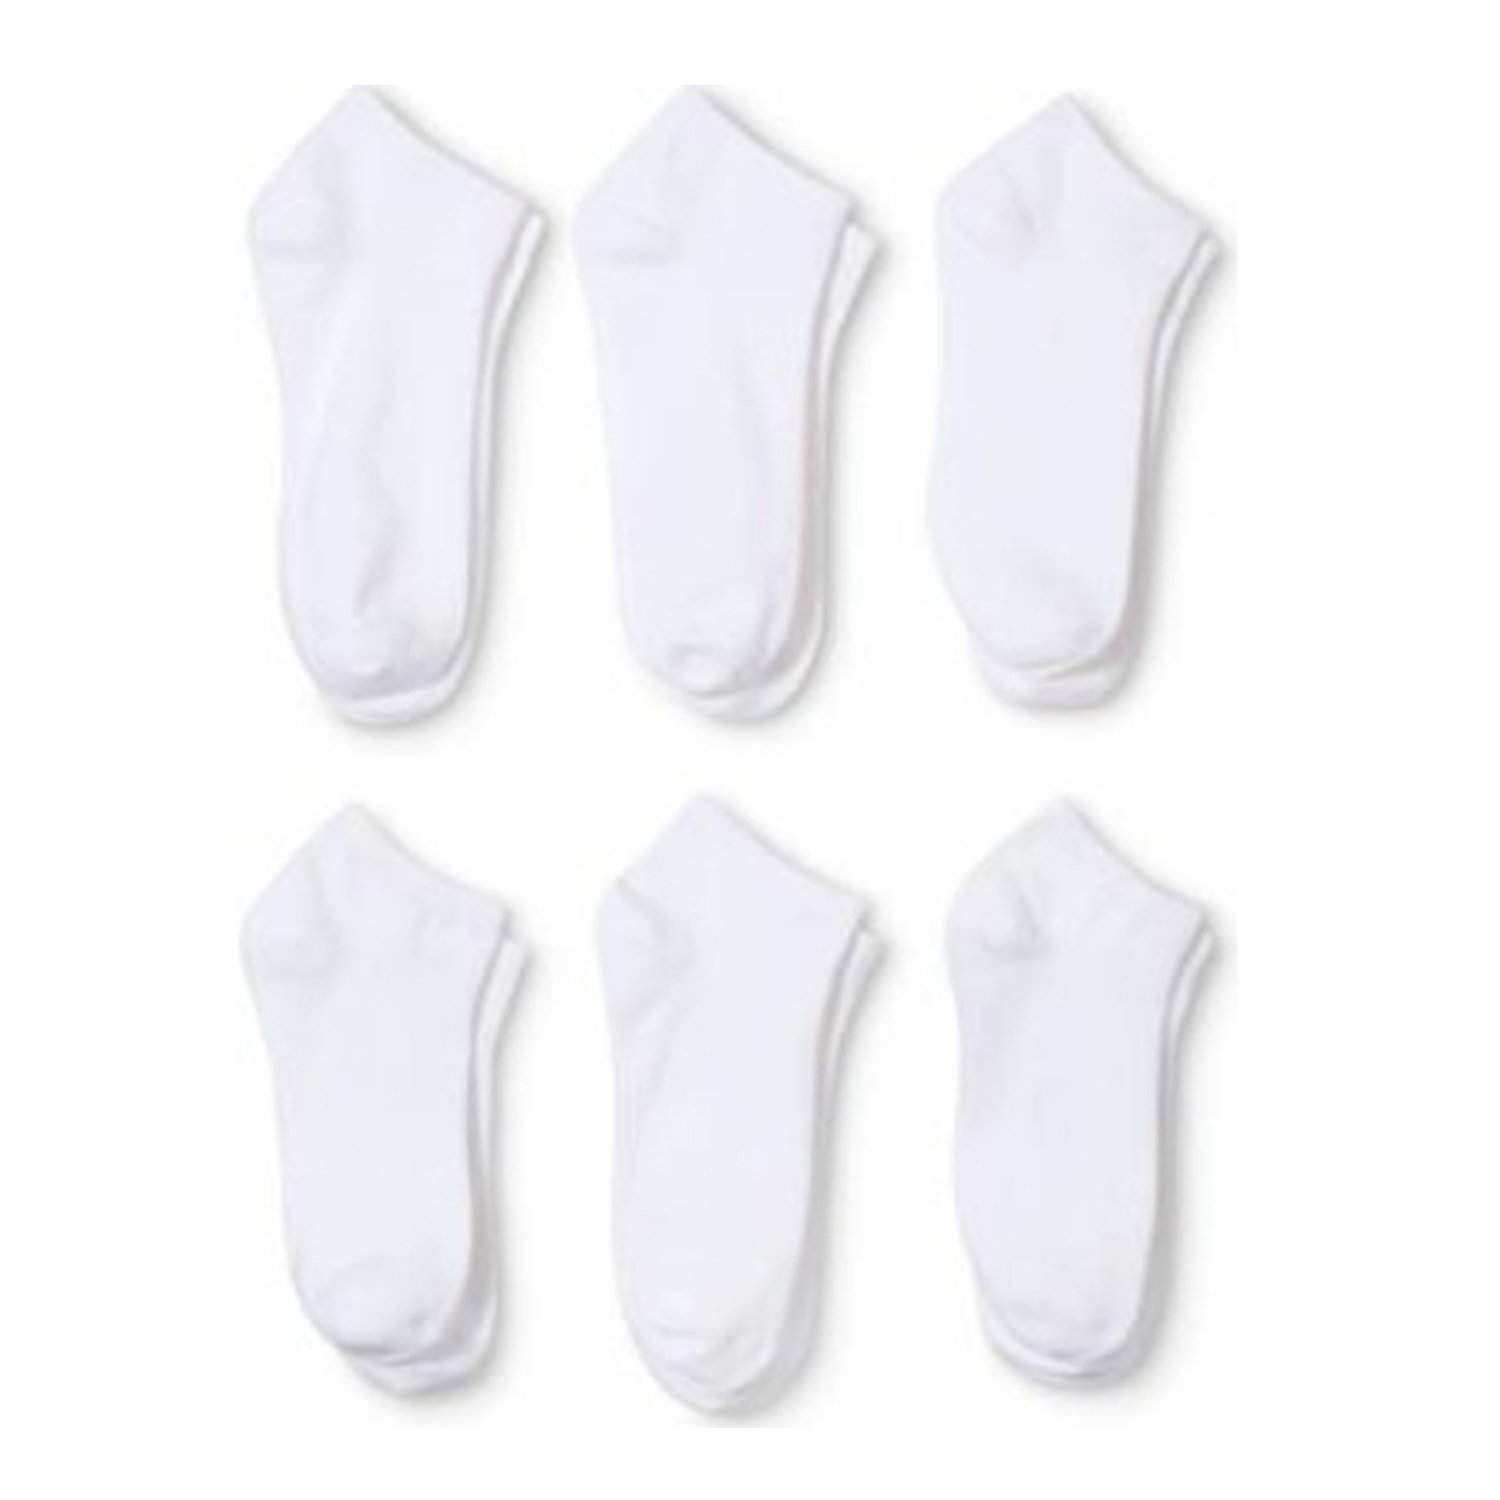 Women Low Cut Ankle Socks 6-8 Available in Black and White - Bulk Wholesale Packs